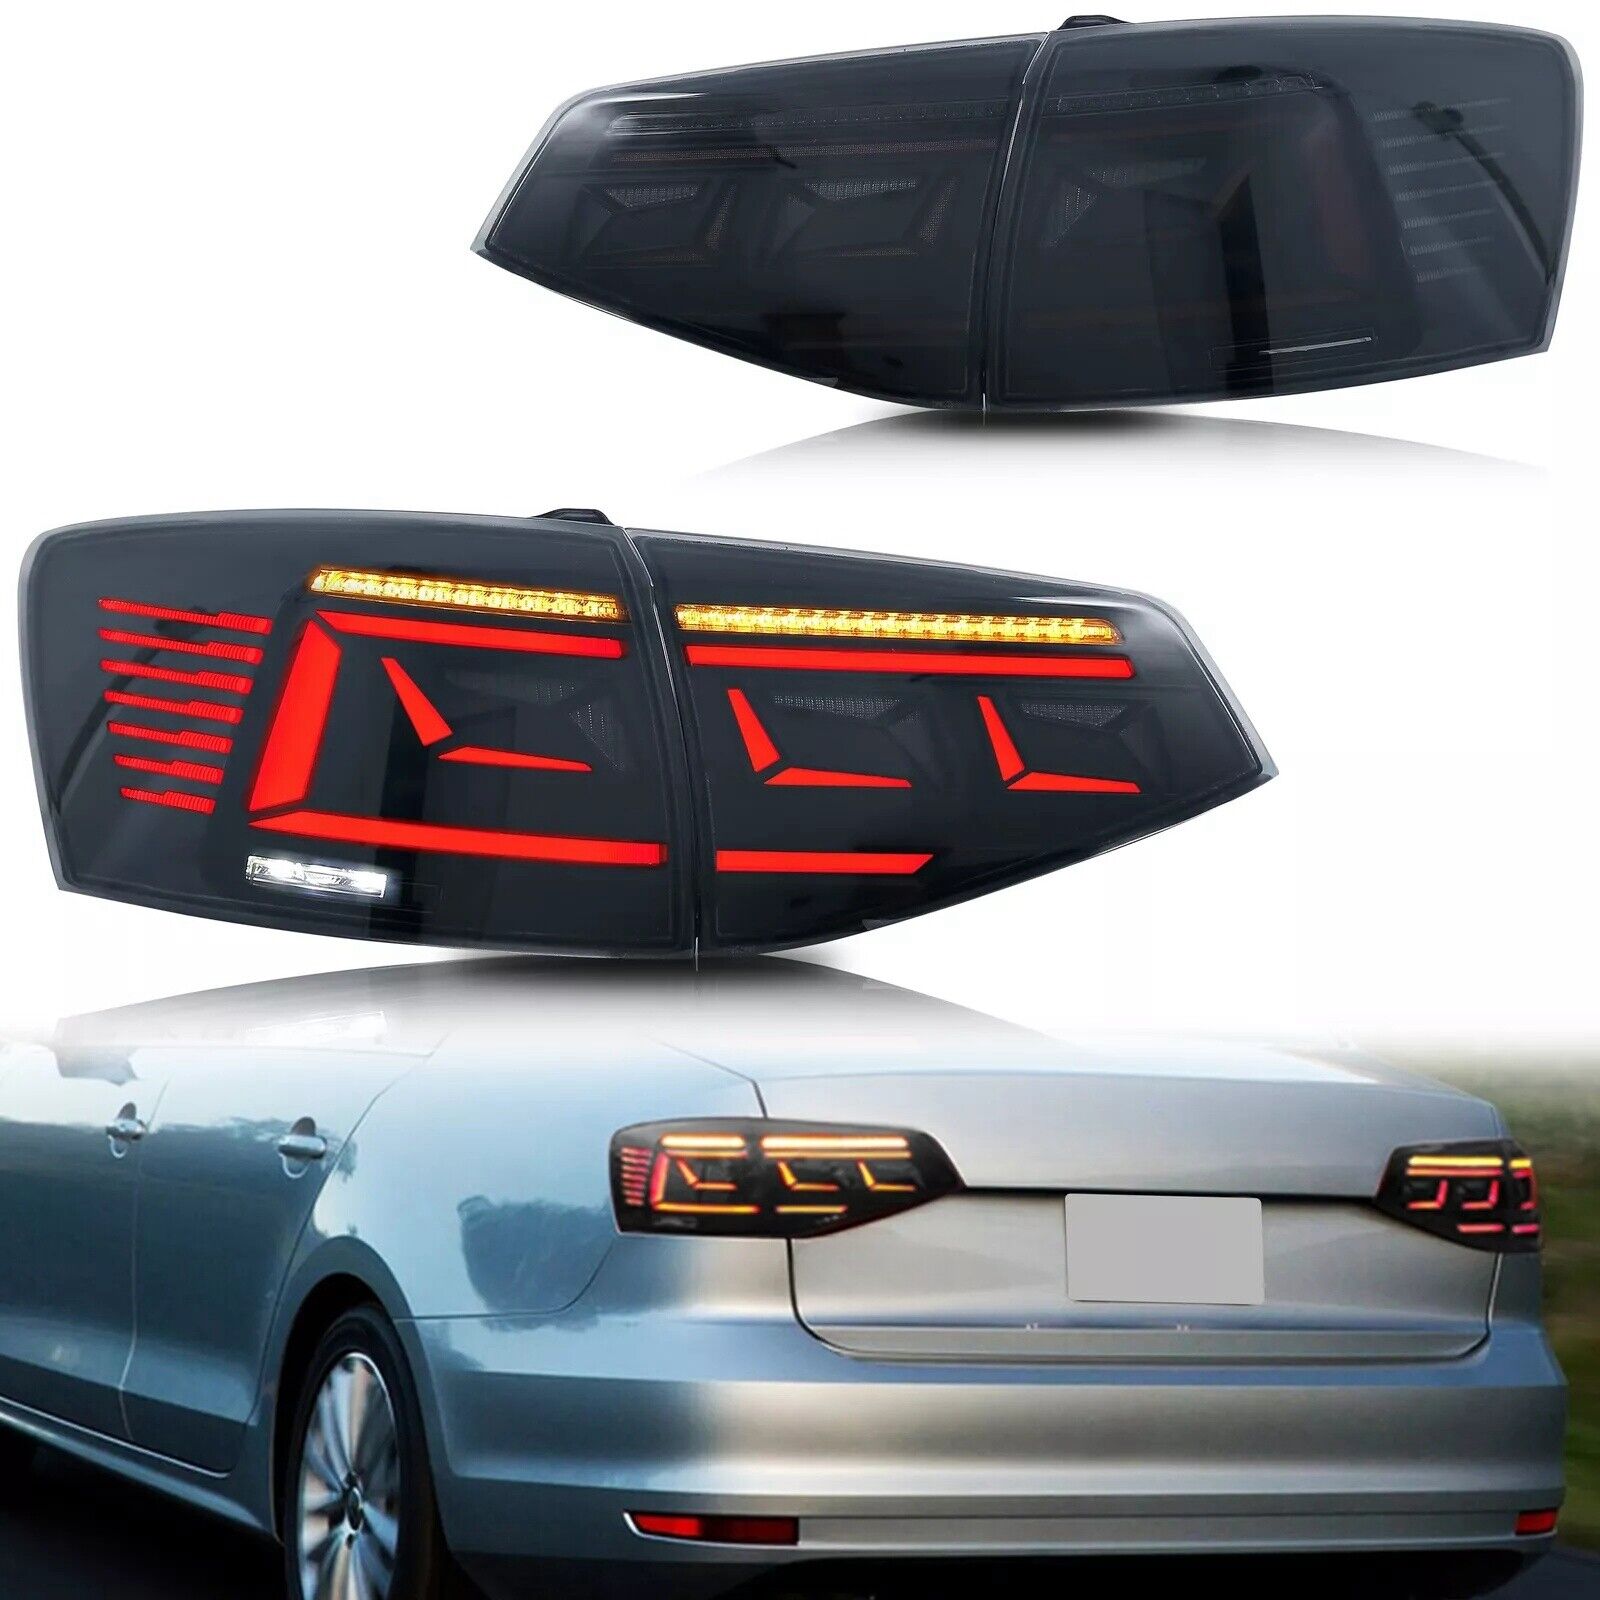 LED Sequential Tail Lights for Volkswagen VW Jetta 2015-2018 Animation Rear Lamp